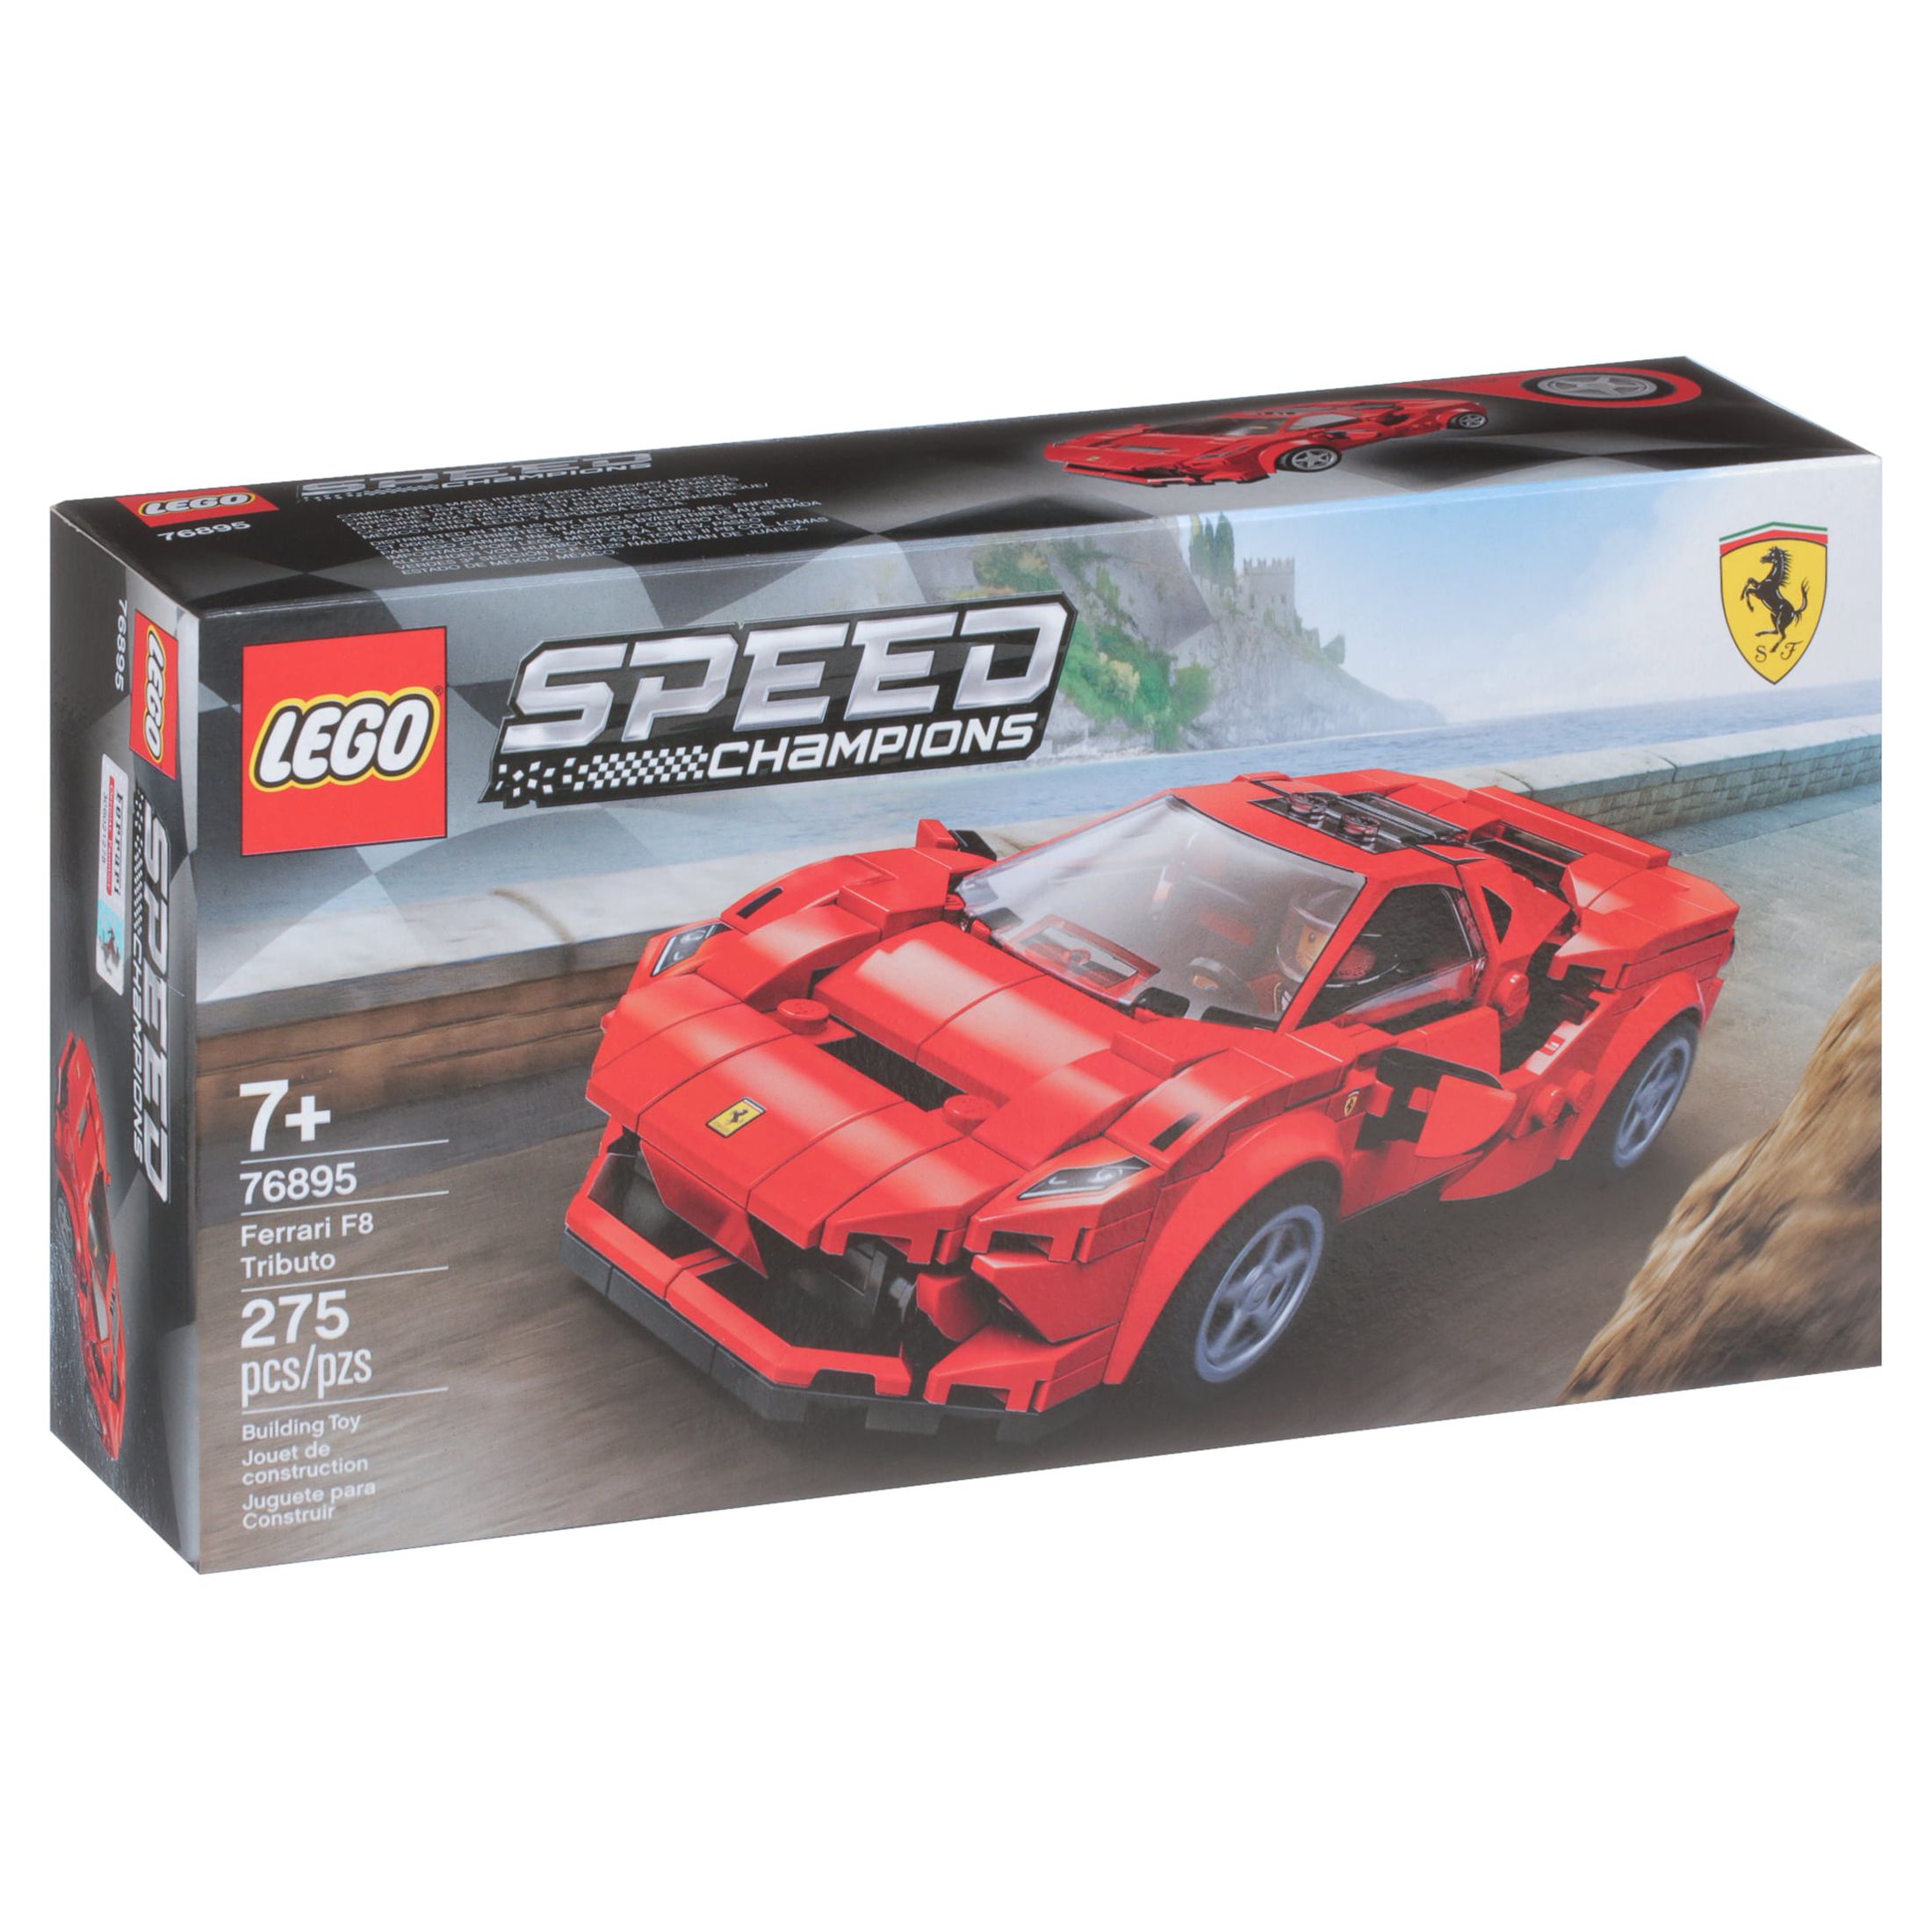 LEGO Speed Champions 76895 Ferrari F8 Tributo Racing Model Car, Vehicle Building Car (275 pieces) - image 11 of 12